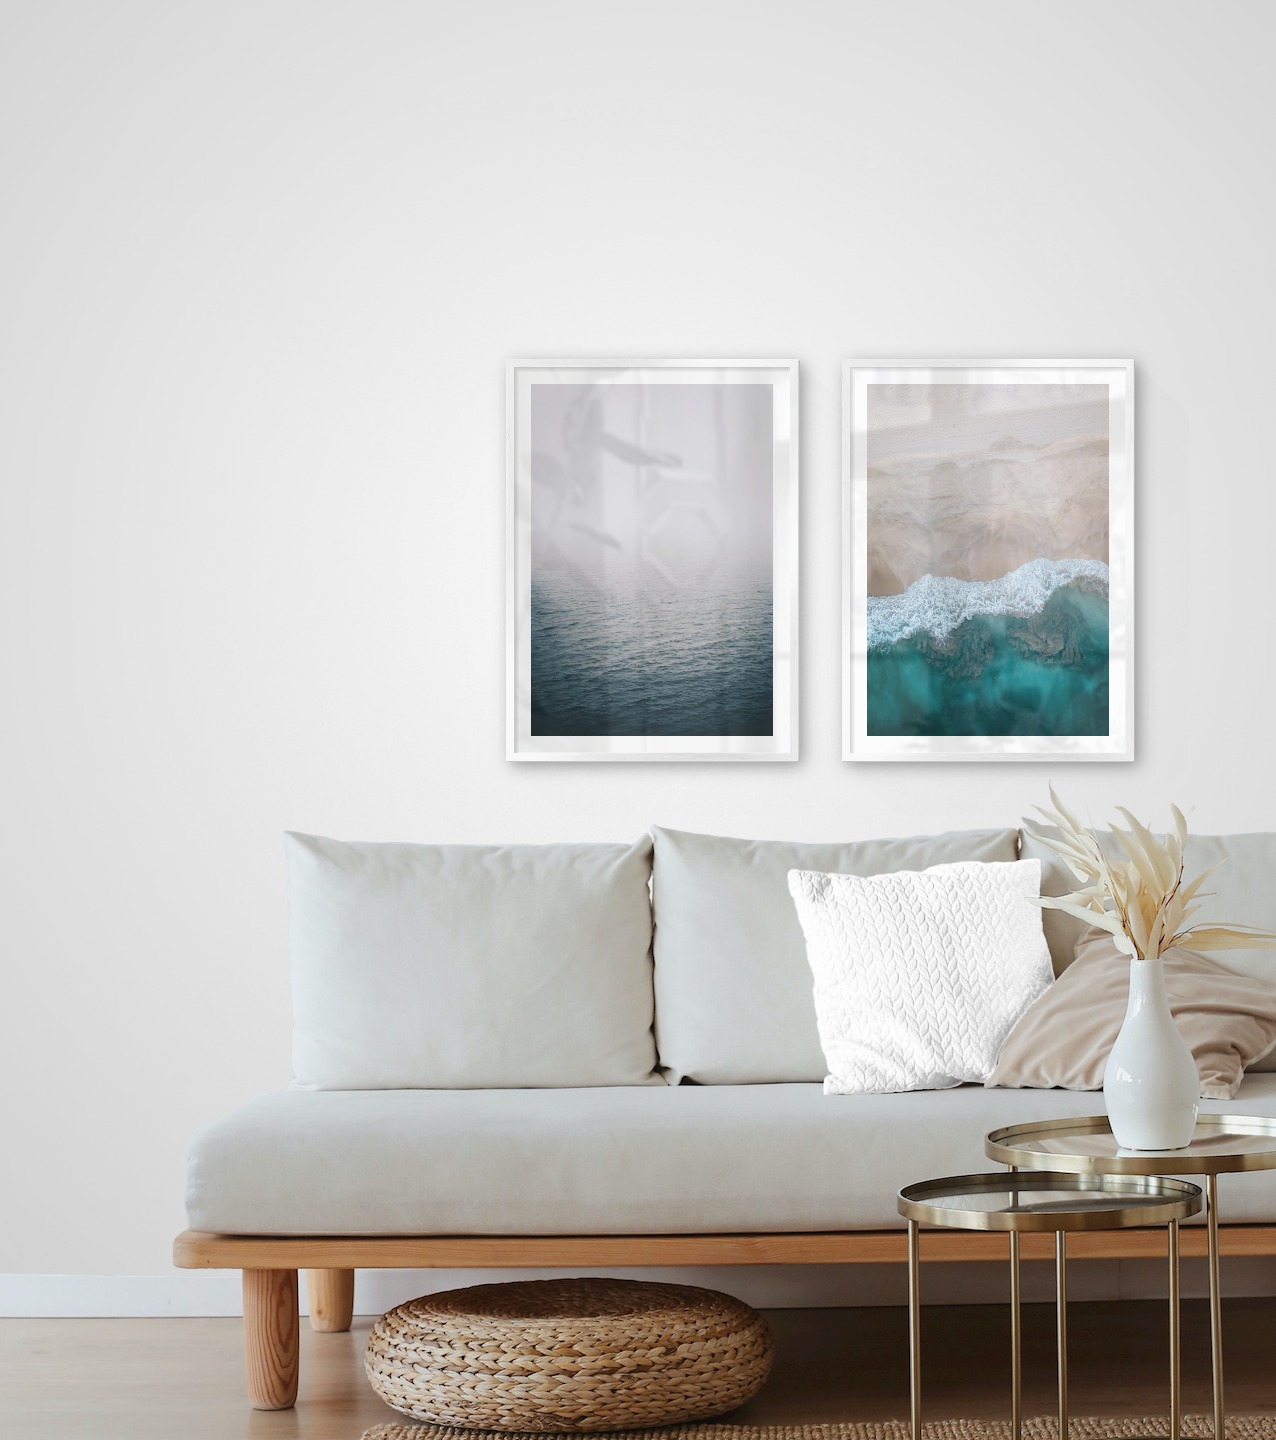 Gallery wall with picture frames in silver in sizes 50x70 with prints "Fog over the sea" and "Beach from above"